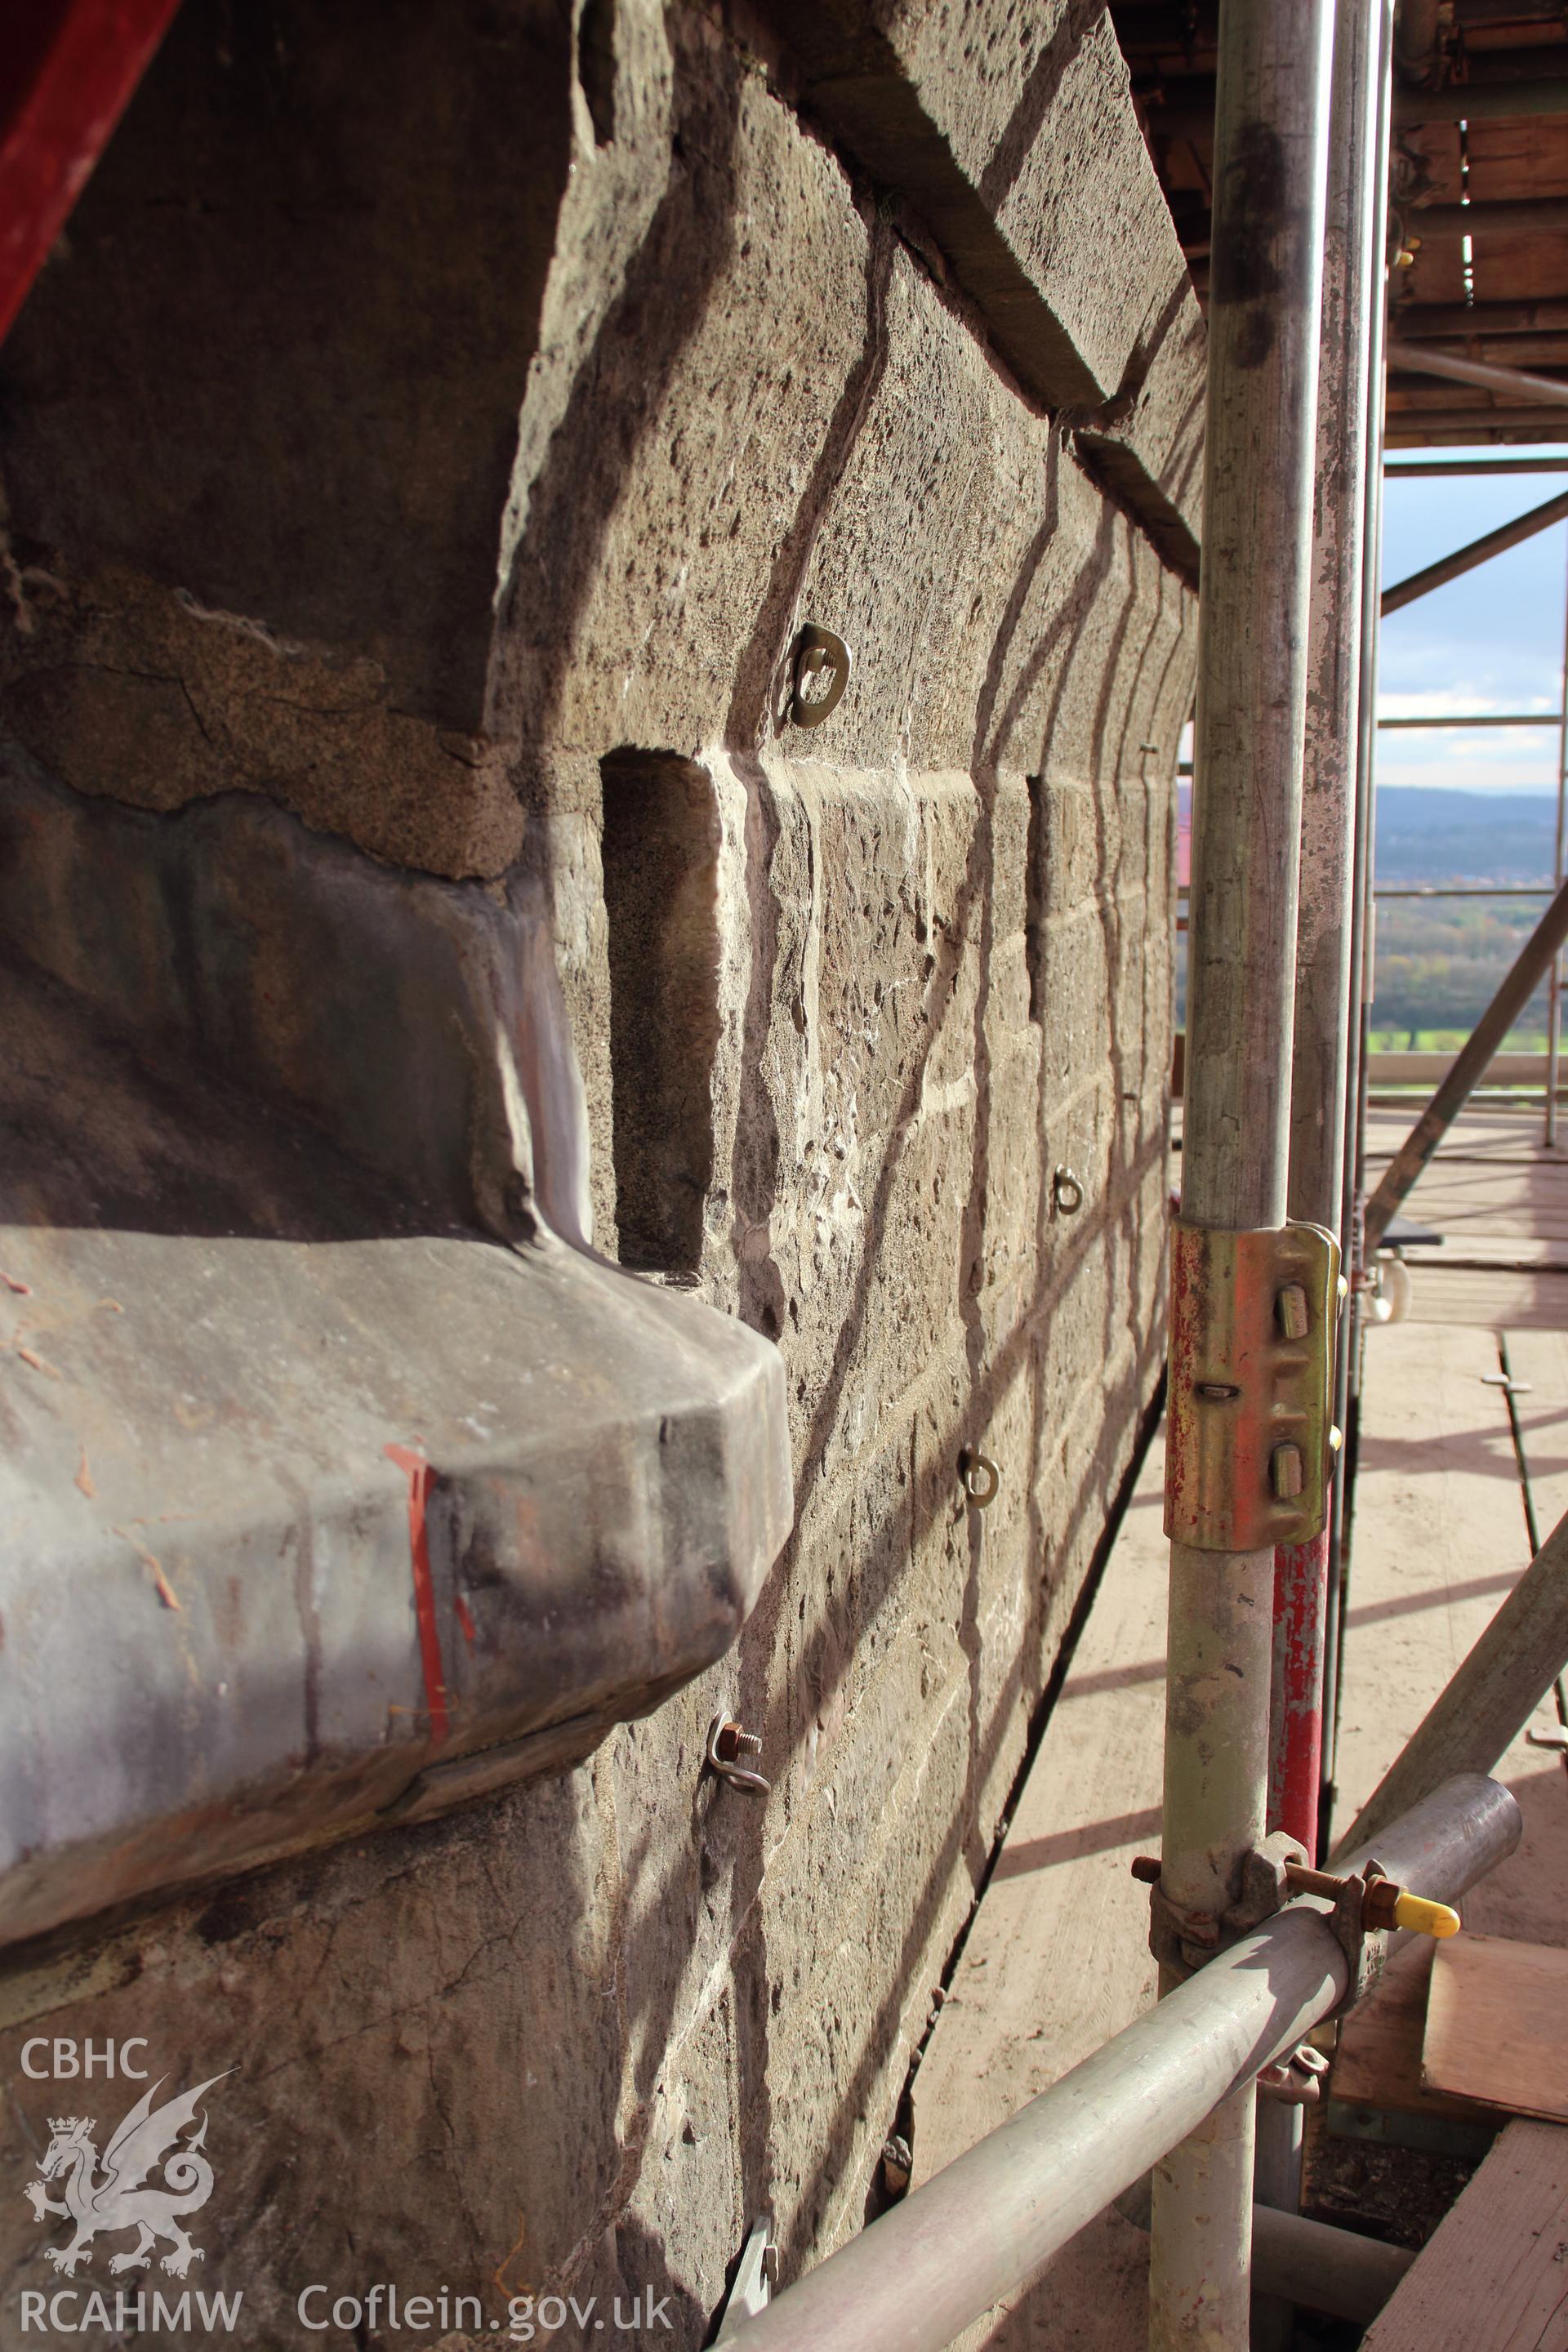 Detailed view of tower wall during renovation, taken 3/4/2019. From "Castell Coch, Tongwynlais, Cardiff. Archaeological Building Investigation and Recording & Watching Brief" by Richard Scott Jones, Heritage Recording Services Wales. Report No 202.